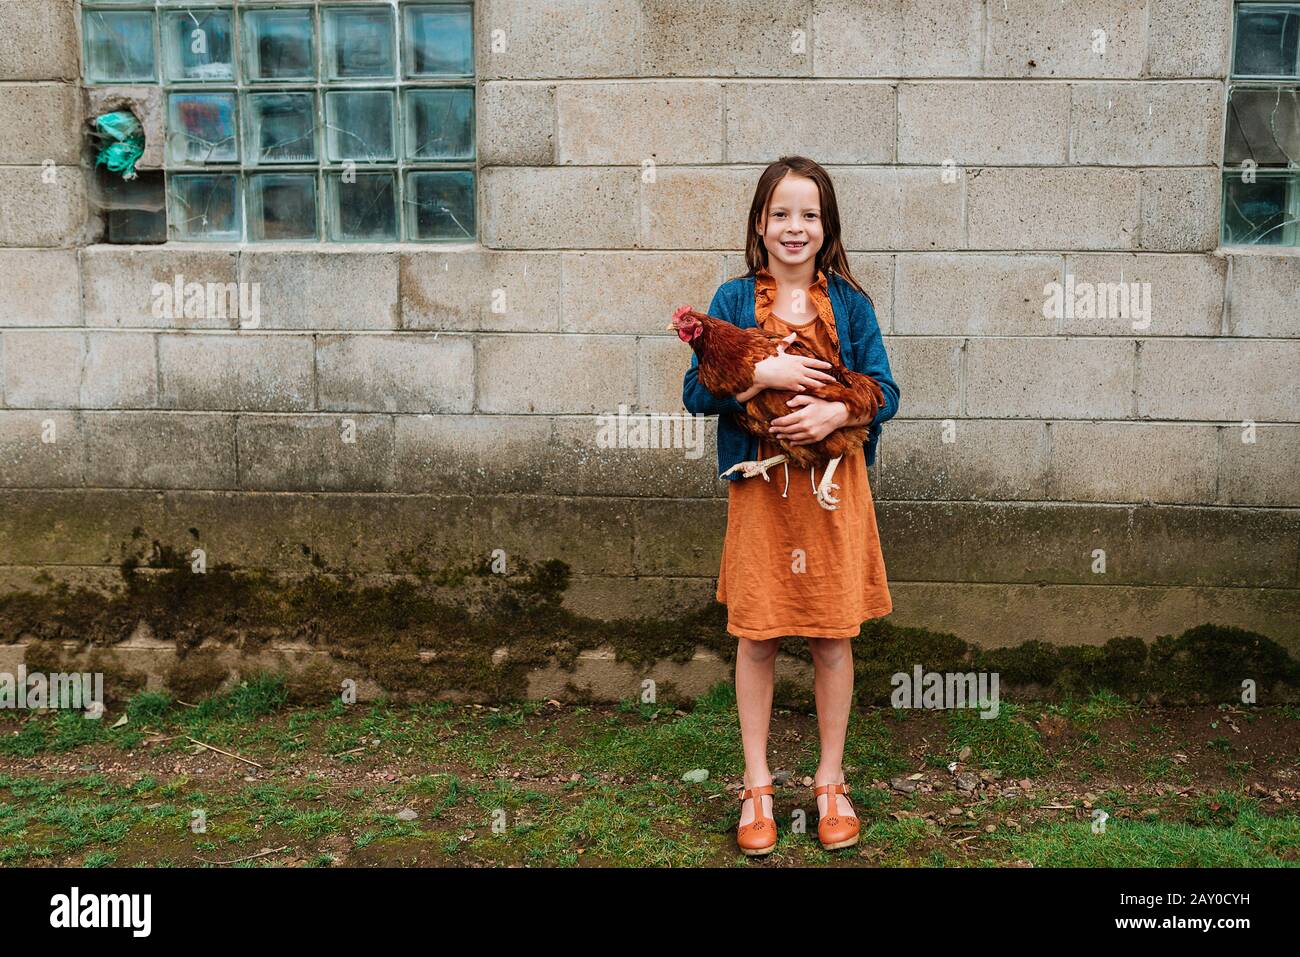 Smiling girl standing on a farm holding a chicken, USA Stock Photo